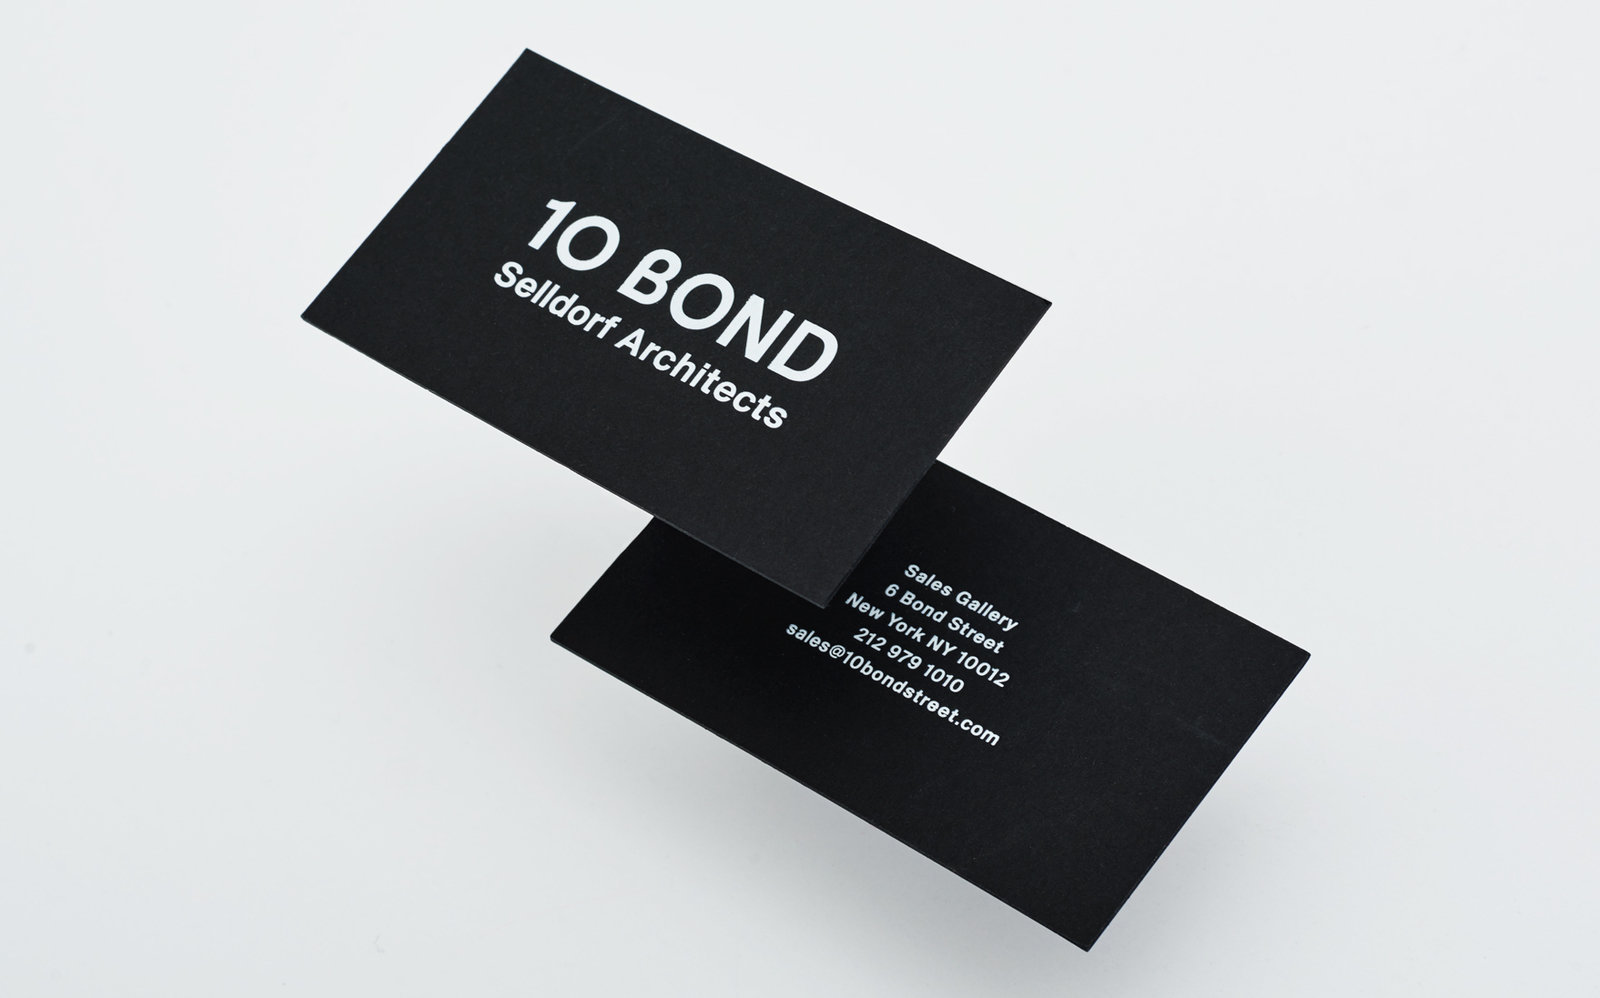 Watson and company 10 bond collateral business card 1600 153x33x1758x1097 q85